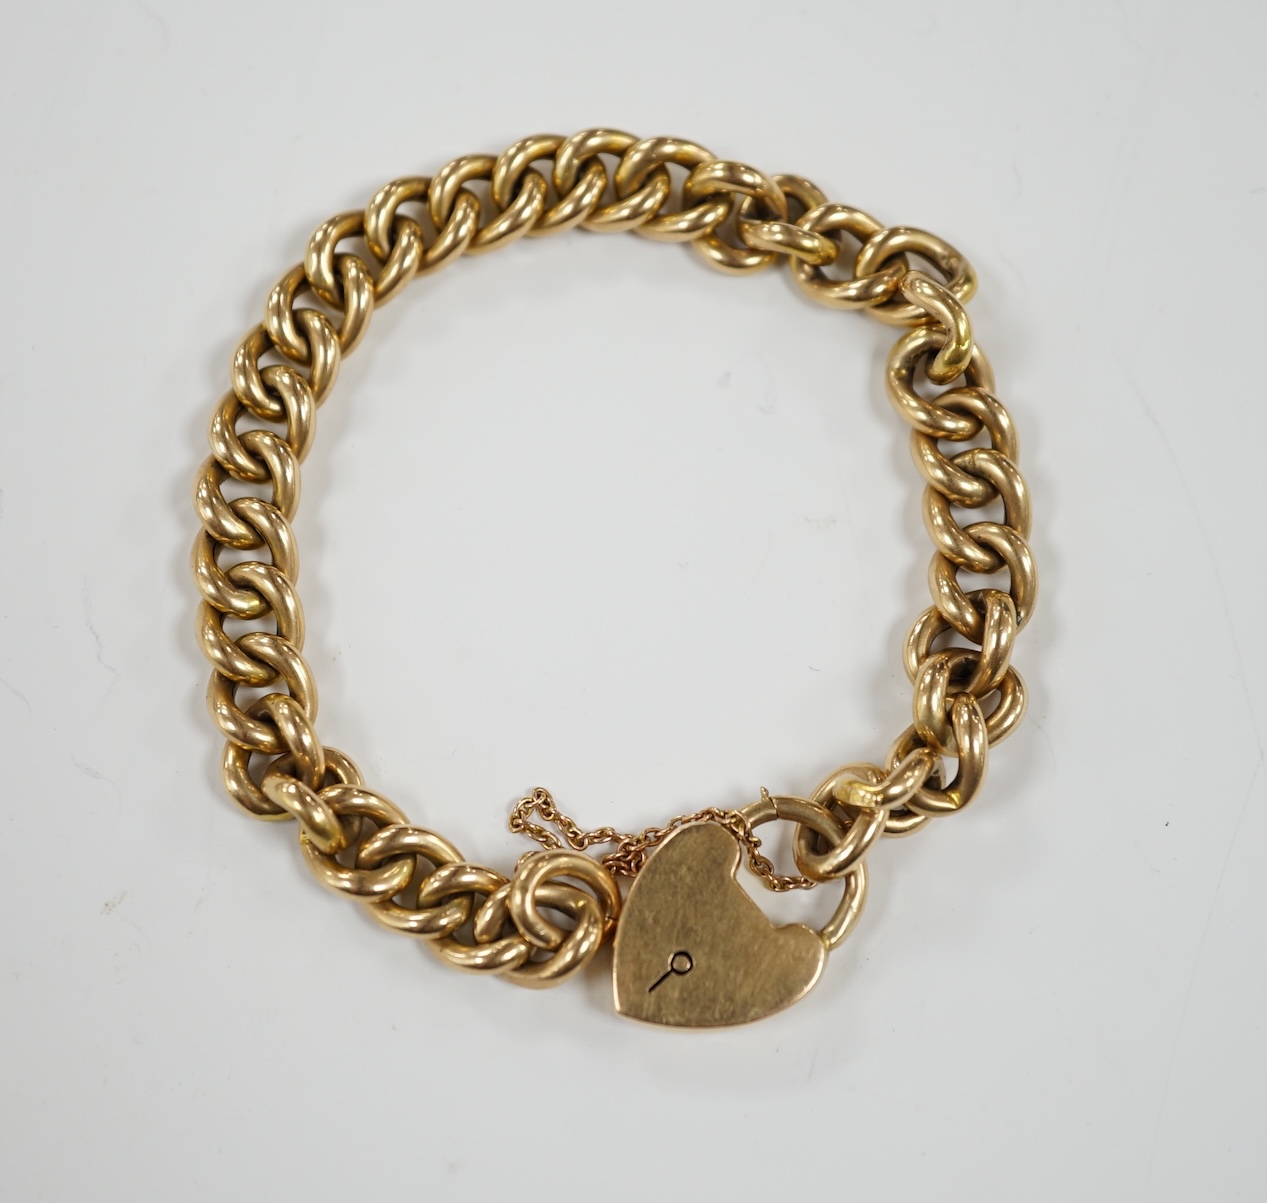 An Edwardian 15ct gold curb link bracelet, with heart shaped padlock clasp, 20cm